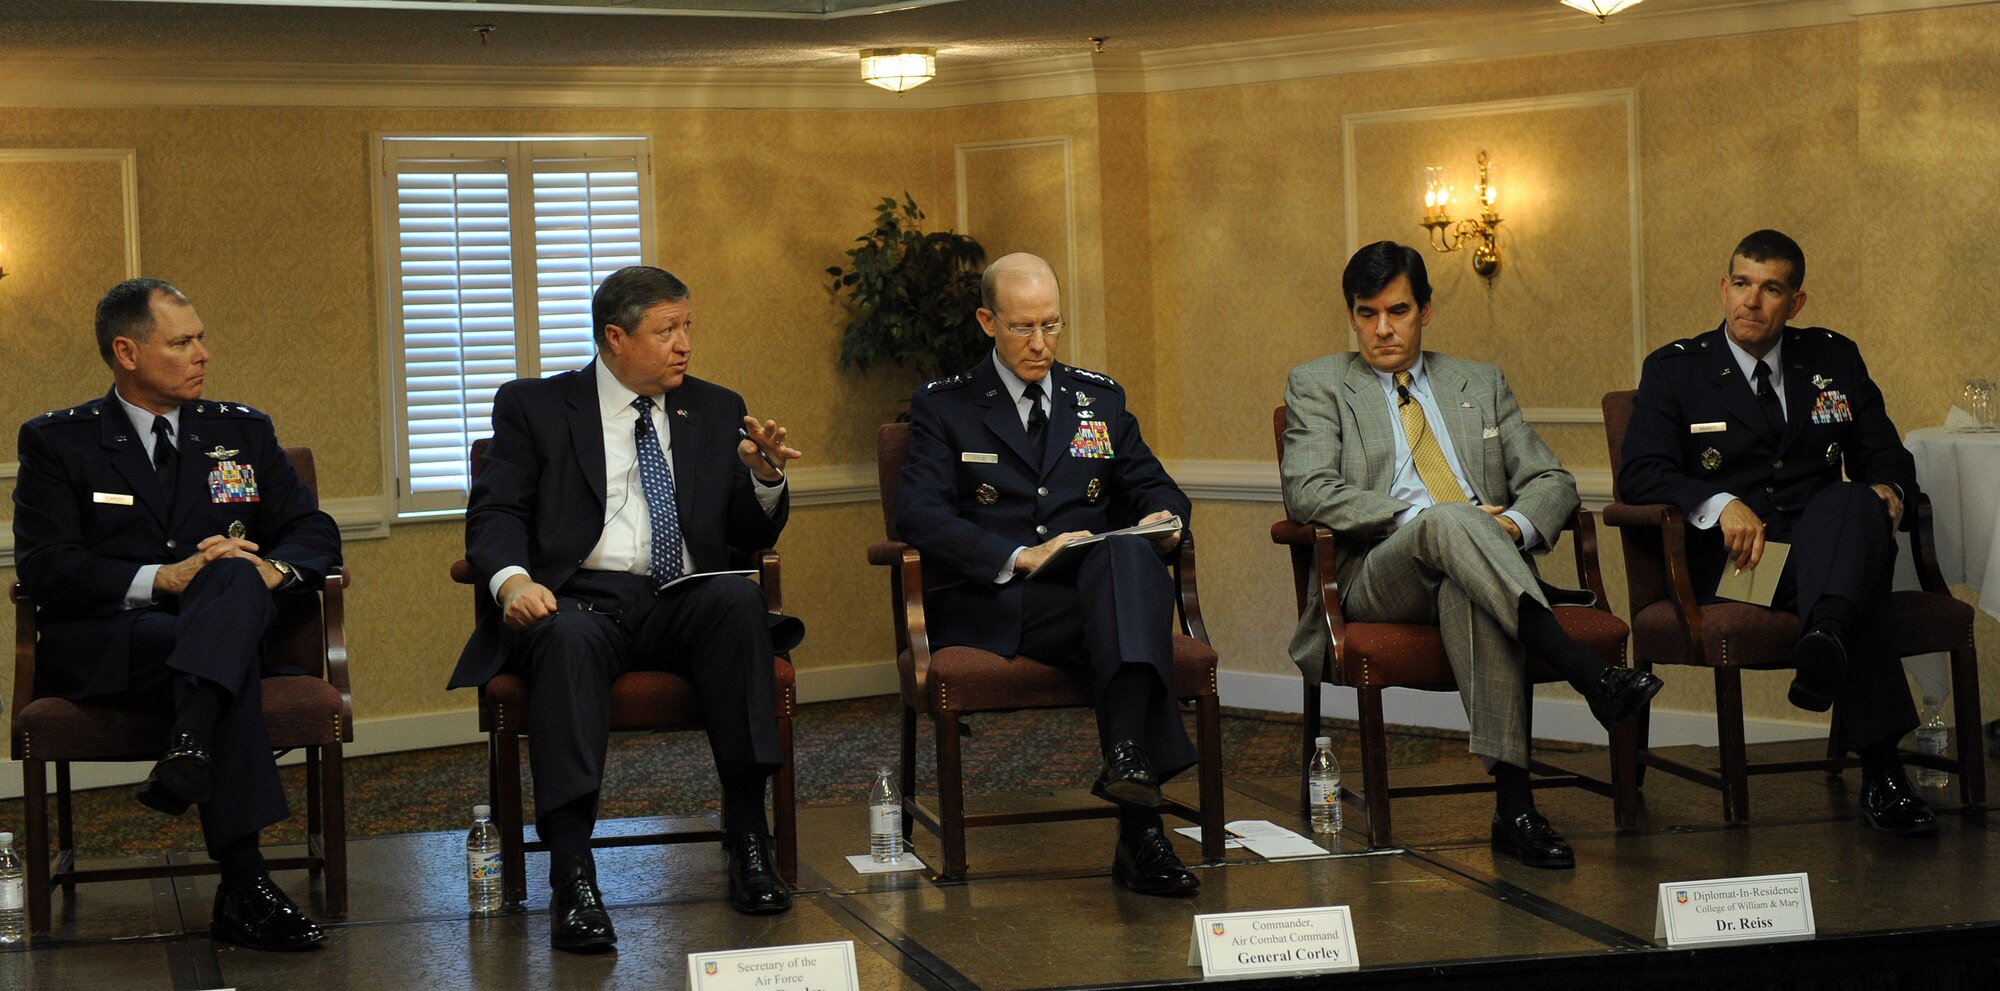 Secretary of the Air Force Michael B. Donley answers a question April 23 during a senior leader panel discussion titled "Leadership for the Future" at the College of William and Mary in Williamsburg, Va.  The panel, a Hampton Roads Air Force Week event, comprised Maj. Gen. Robert B. Newman Jr., adjutant general of Virginia; Secretary Donley; Gen. John D.W. Corley, commander of Air Combat Command; Dr. Mitchell B. Reiss, senior American diplomat and vice-provost of international affairs at William & Mary; and Brig. Gen. Mark A. Barrett, 1st Fighter Wing commander at nearby Langley Air Force Base.  (U.S. Air Force photo/Airman 1st Class Zachary Wolf)